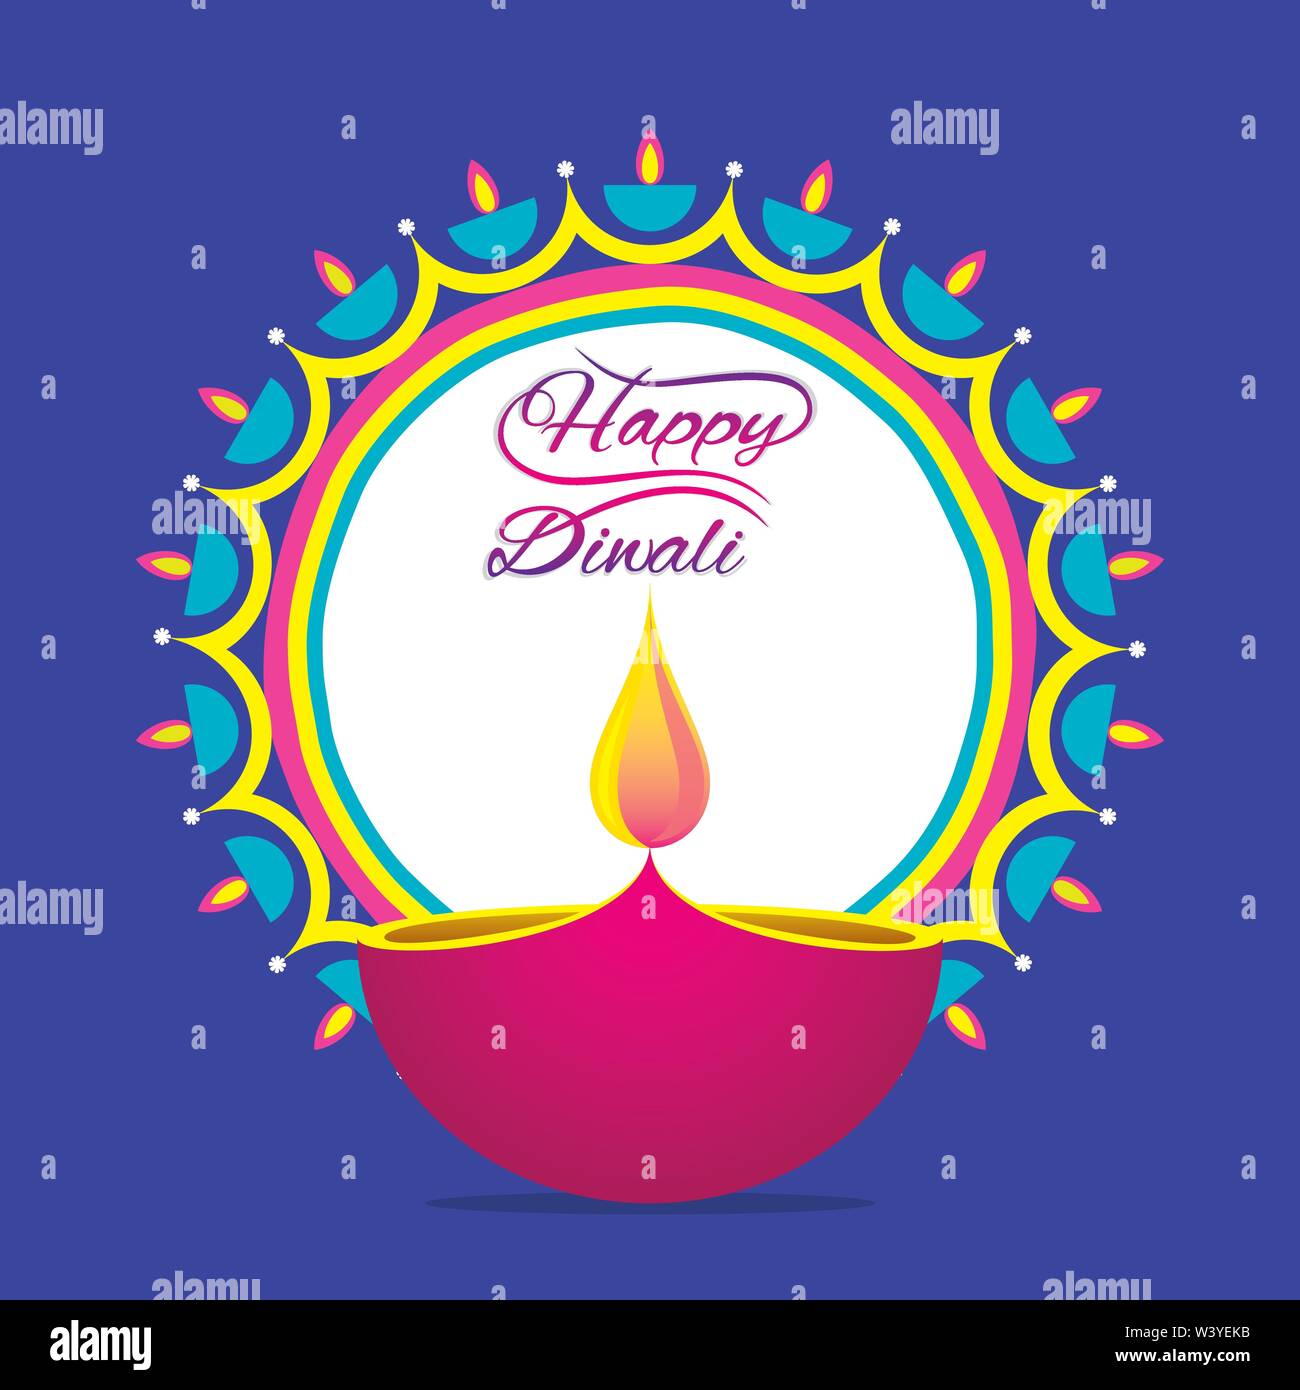 Diwali greeting design Stock Vector Images - Page 2 - Alamy